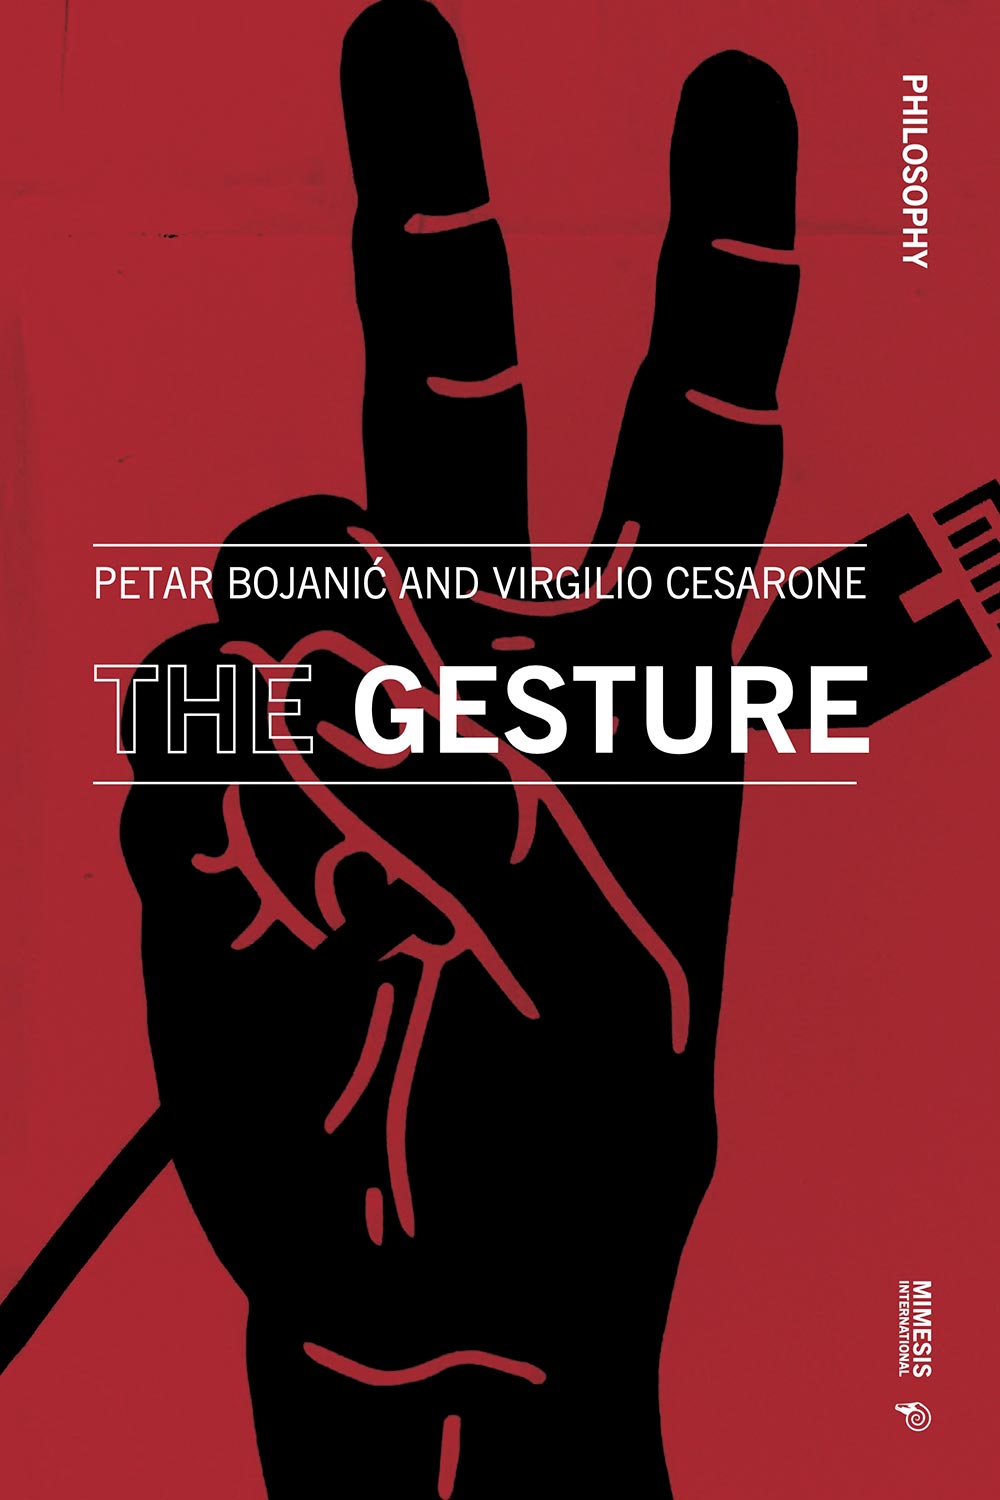 The gesture